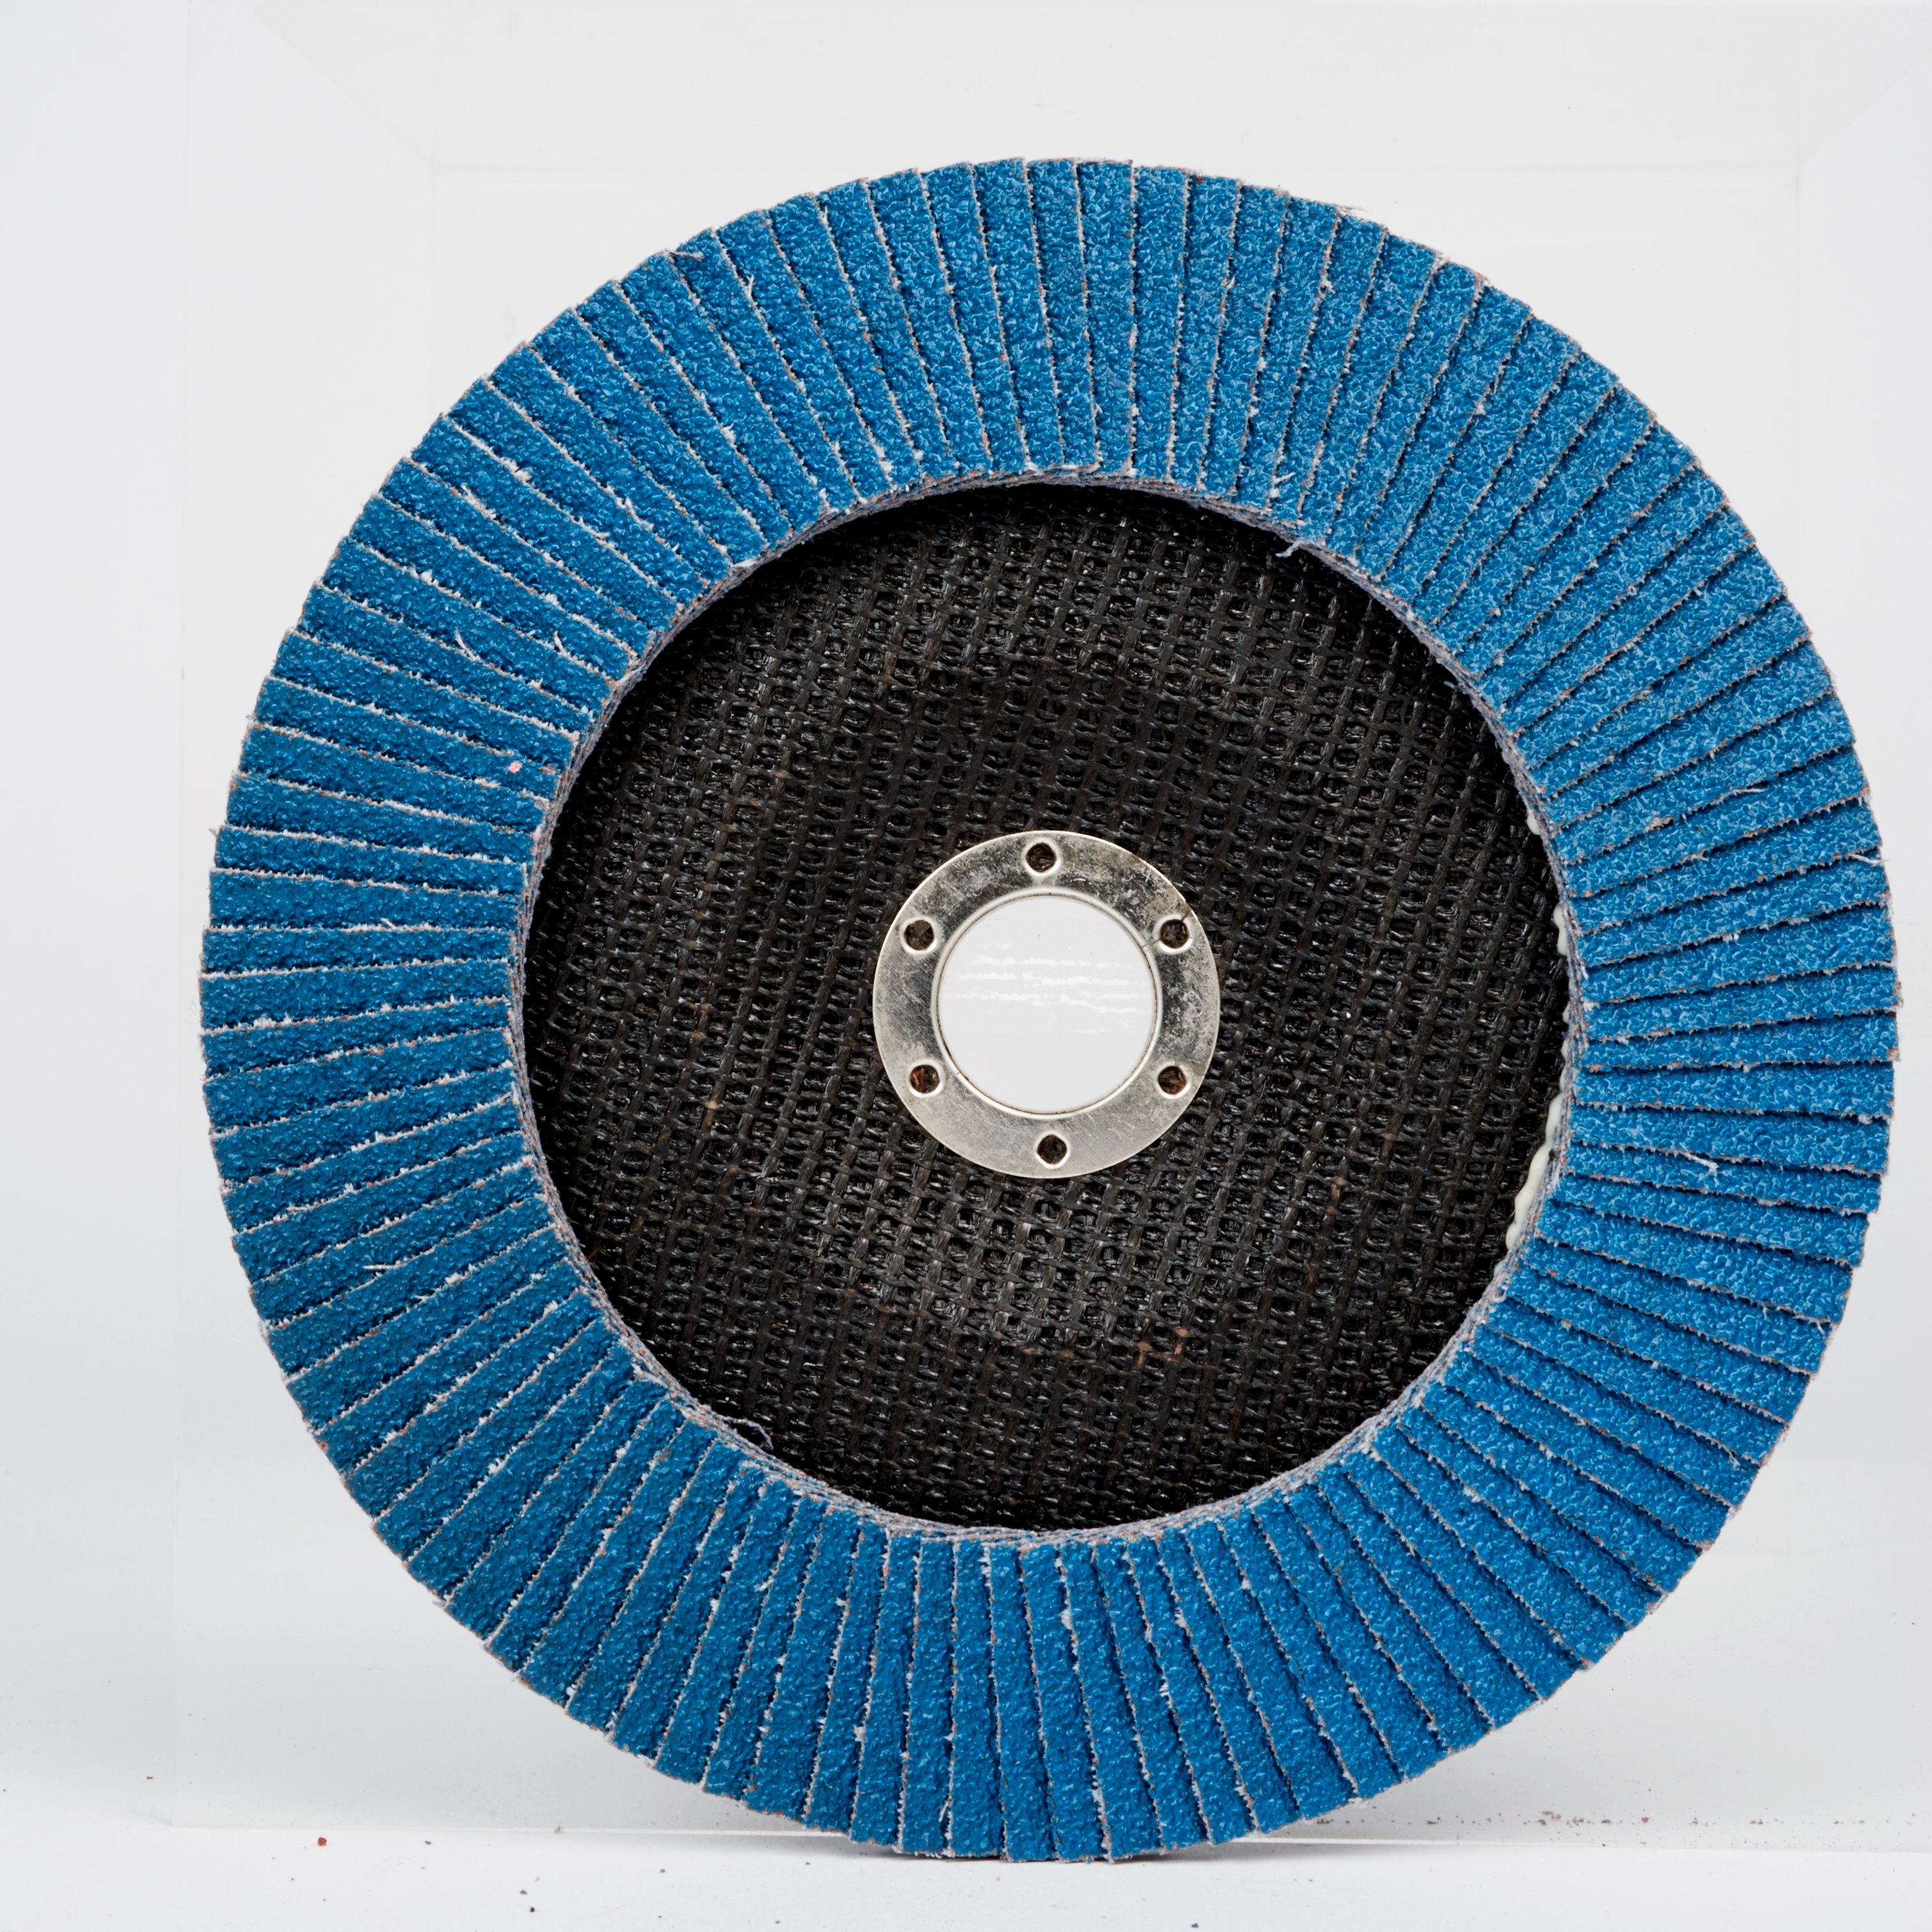 3M™ Flap Disc 566A is one of the flap discs suited to work with 3M™ Flap Disc Adapter Nuts